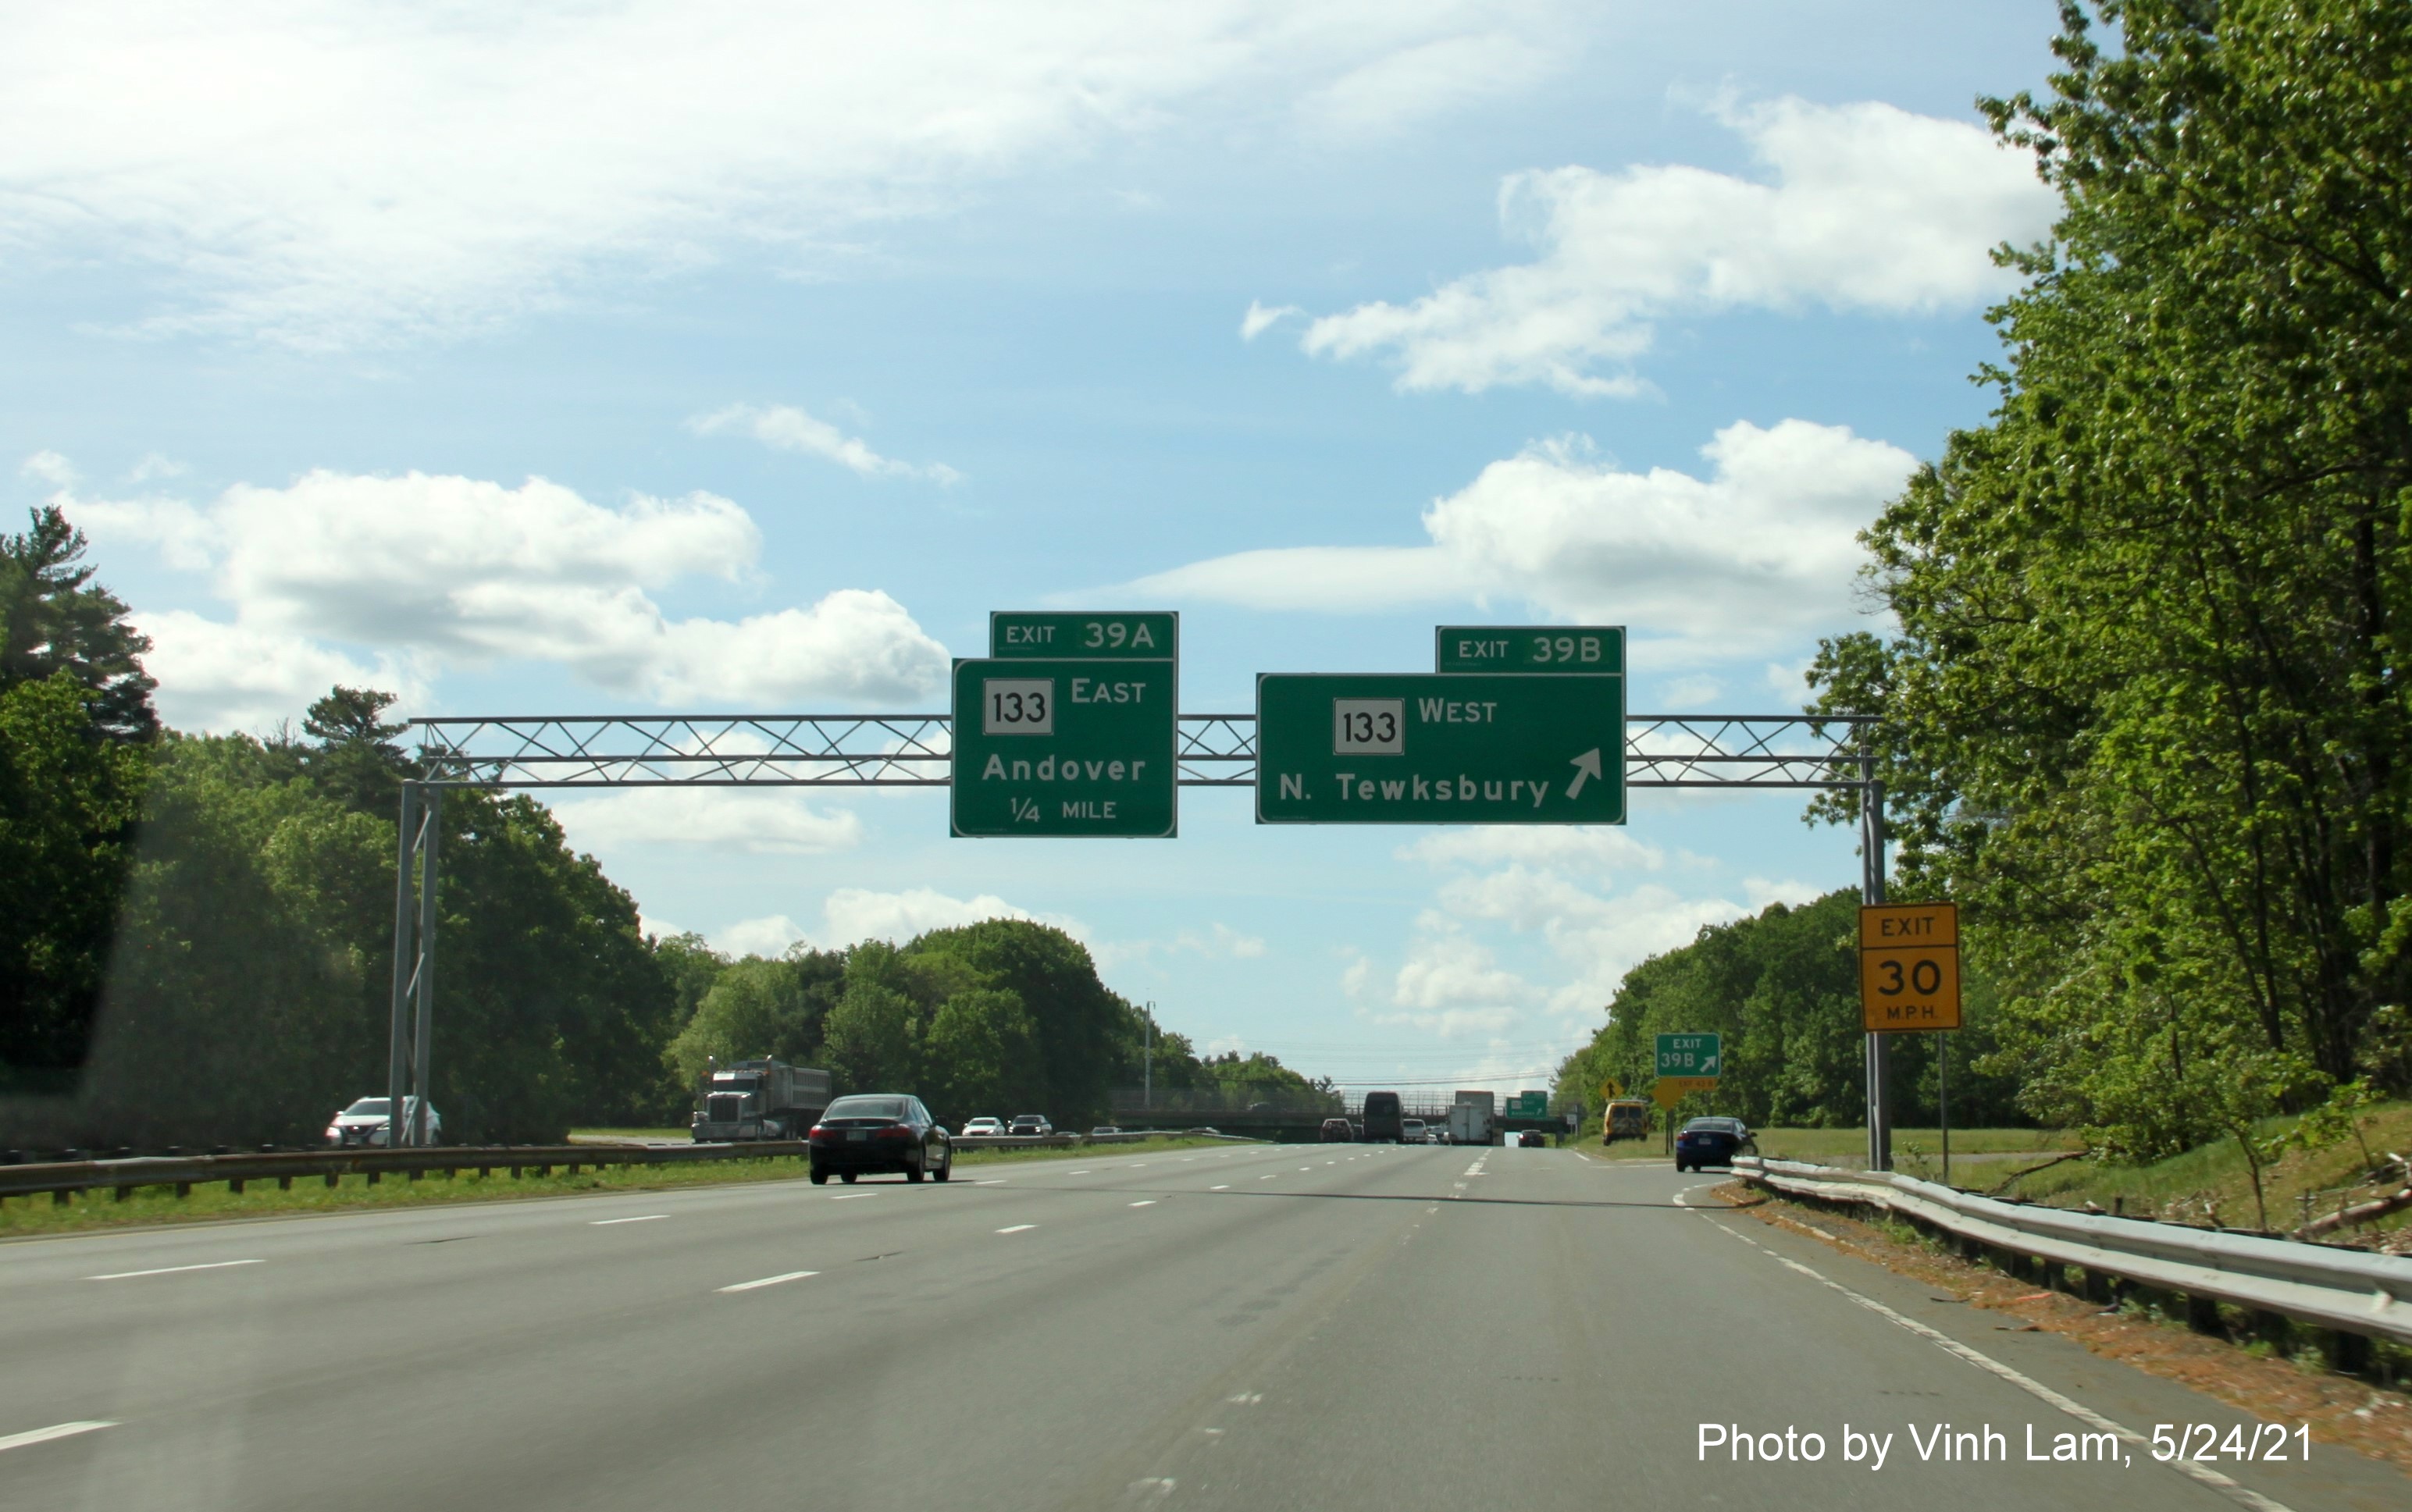 Image of overhead signage at ramp for MA 133 West exit with new milepost based exit numbers on I-93 South in Andover, by Vinh Lam, May 2021